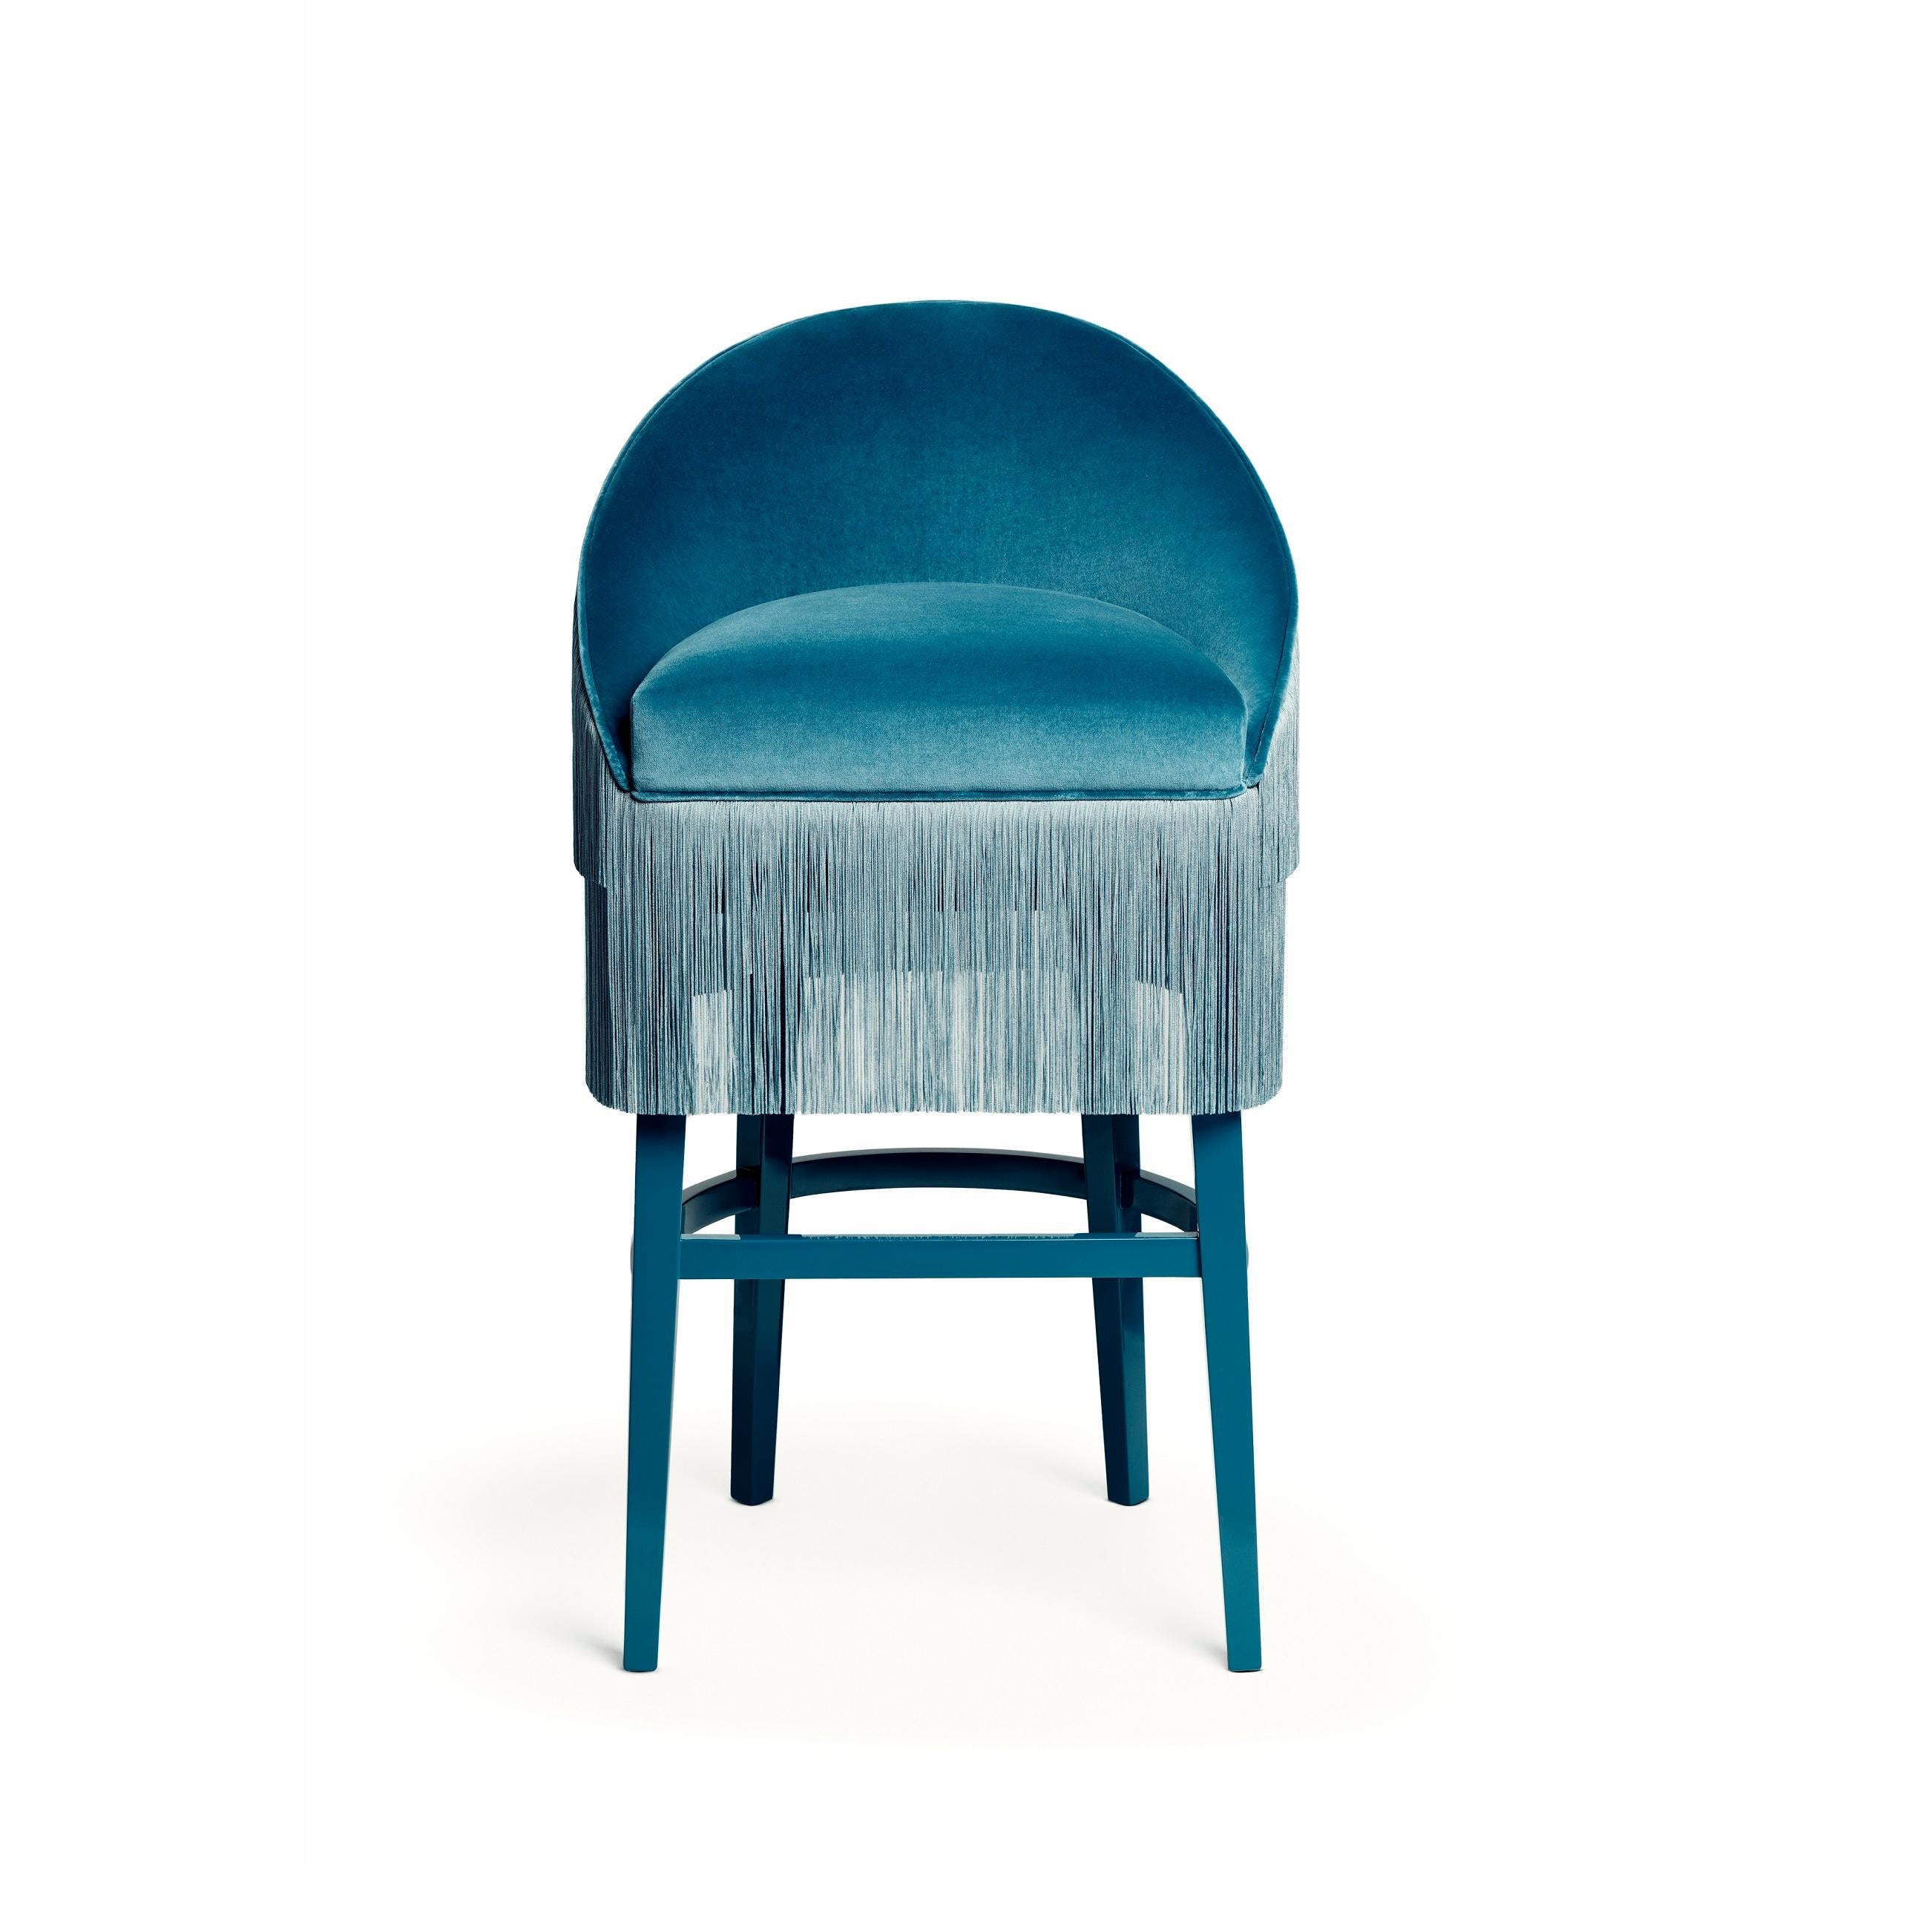 The handmade barstool draws on the signature fashion theme, ruffling the scene and inviting guests with its fun and flirtatious feel. Featuring three layers of fringes that run along the front and reverse of the wide seat, set against a curved